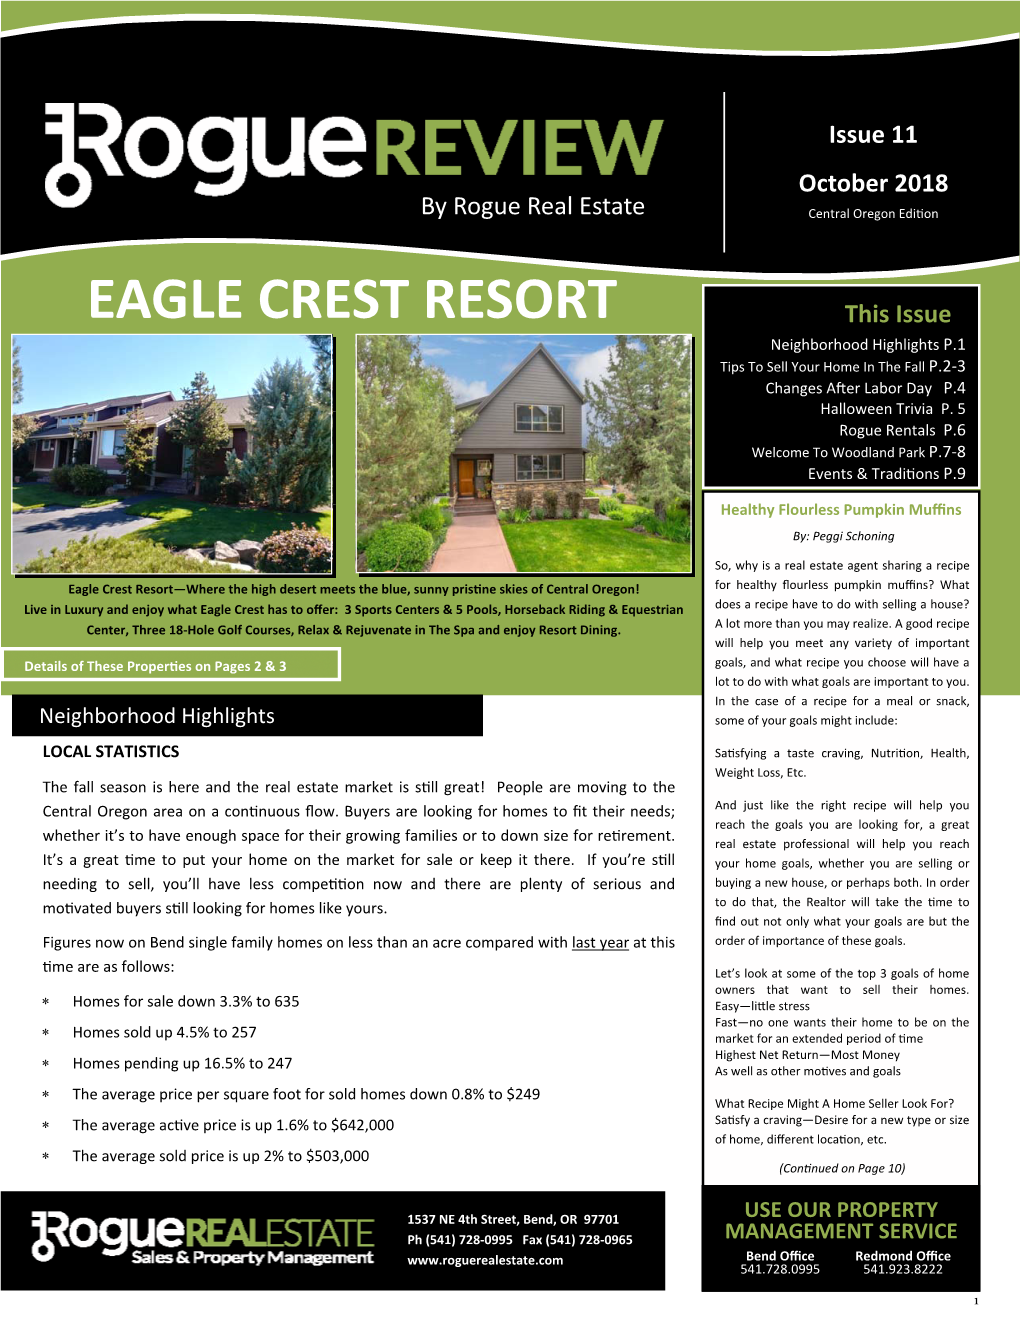 EAGLE CREST RESORT This Issue Neighborhood Highlights P.1 Tips to Sell Your Home in the Fall P.2‐3 Changes A�Er Labor Day P.4 Halloween Trivia P